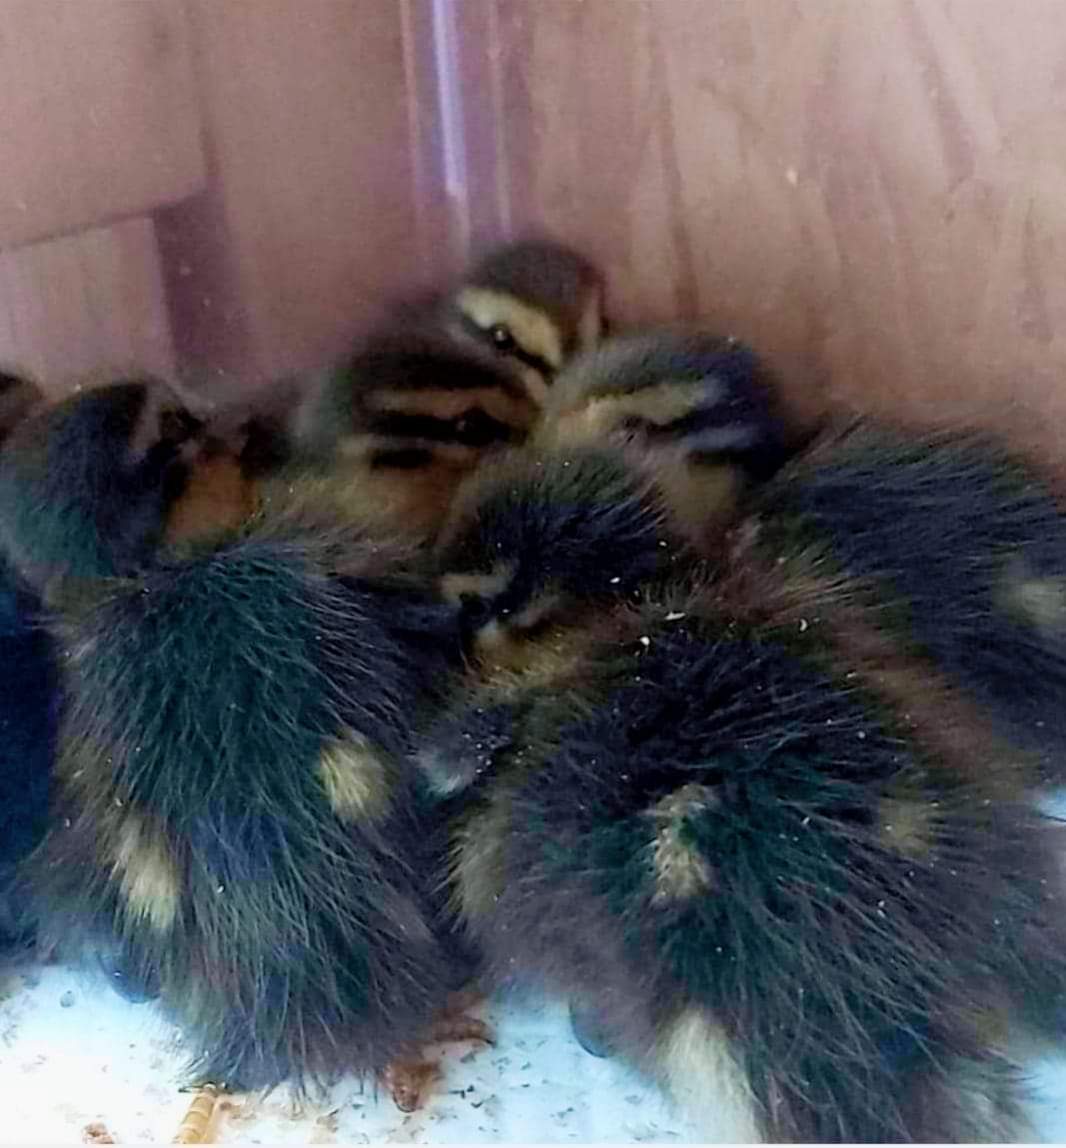 Do any of you local folk have any newspapers they don't need anymore? Meltham wildlife rescue are swamped with orphaned ducklings, and they're desperate. We can collect locally and take them over.